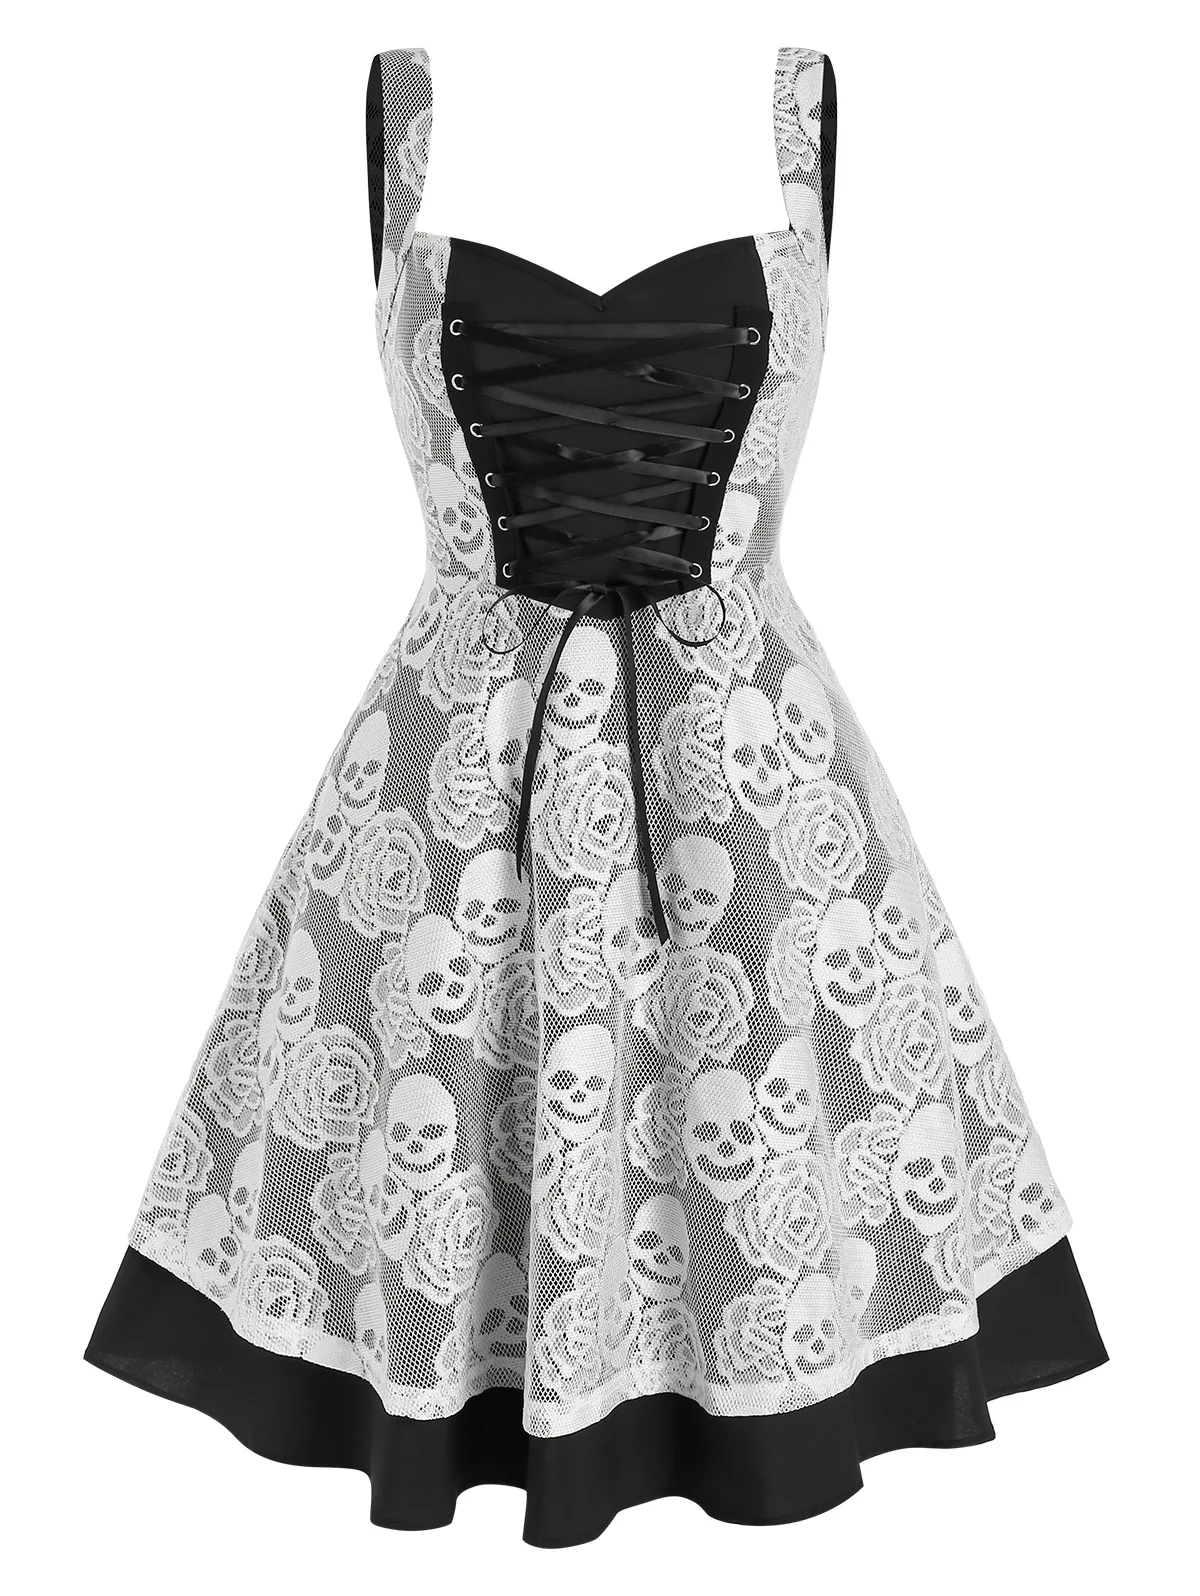 

Sweetheart Neck Floral Skull Lace Insert Dress Fit and Flare Lace Up Gothic Halloween Dresses